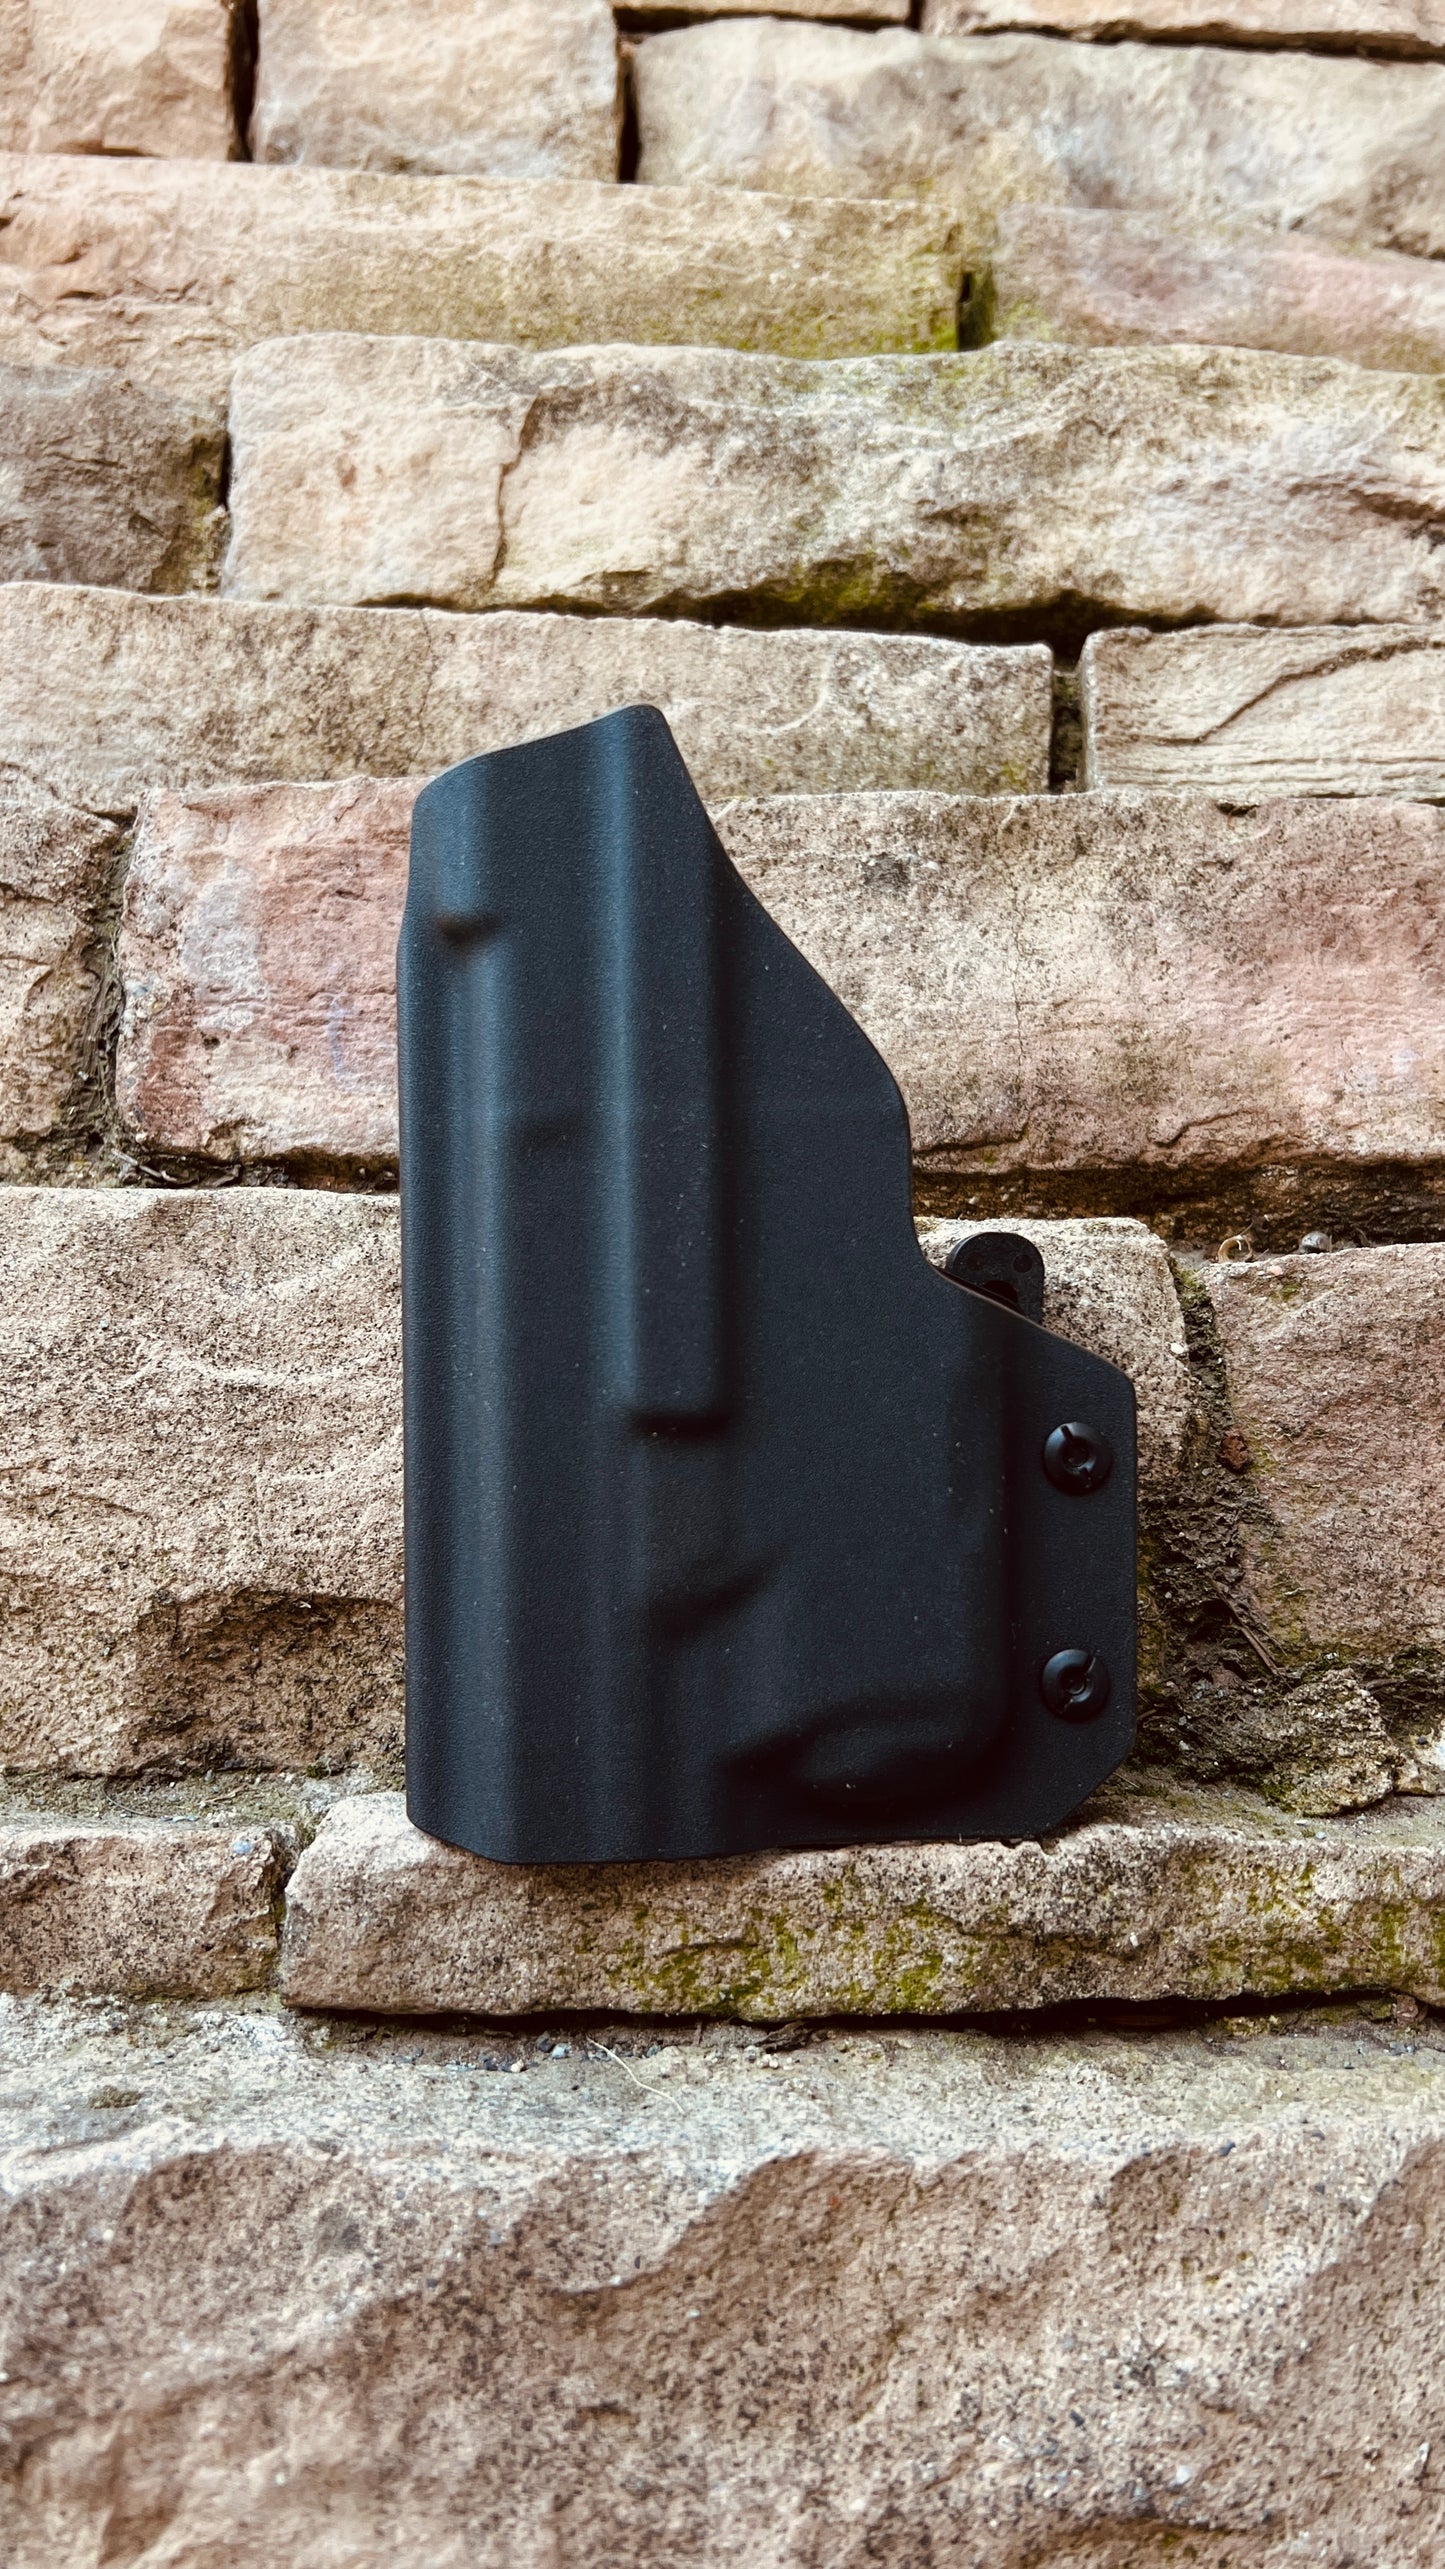 Smith & Wesson 9/40 Shield w/ TLR-6 IWB Belt-less Kydex Holster (Black Series)